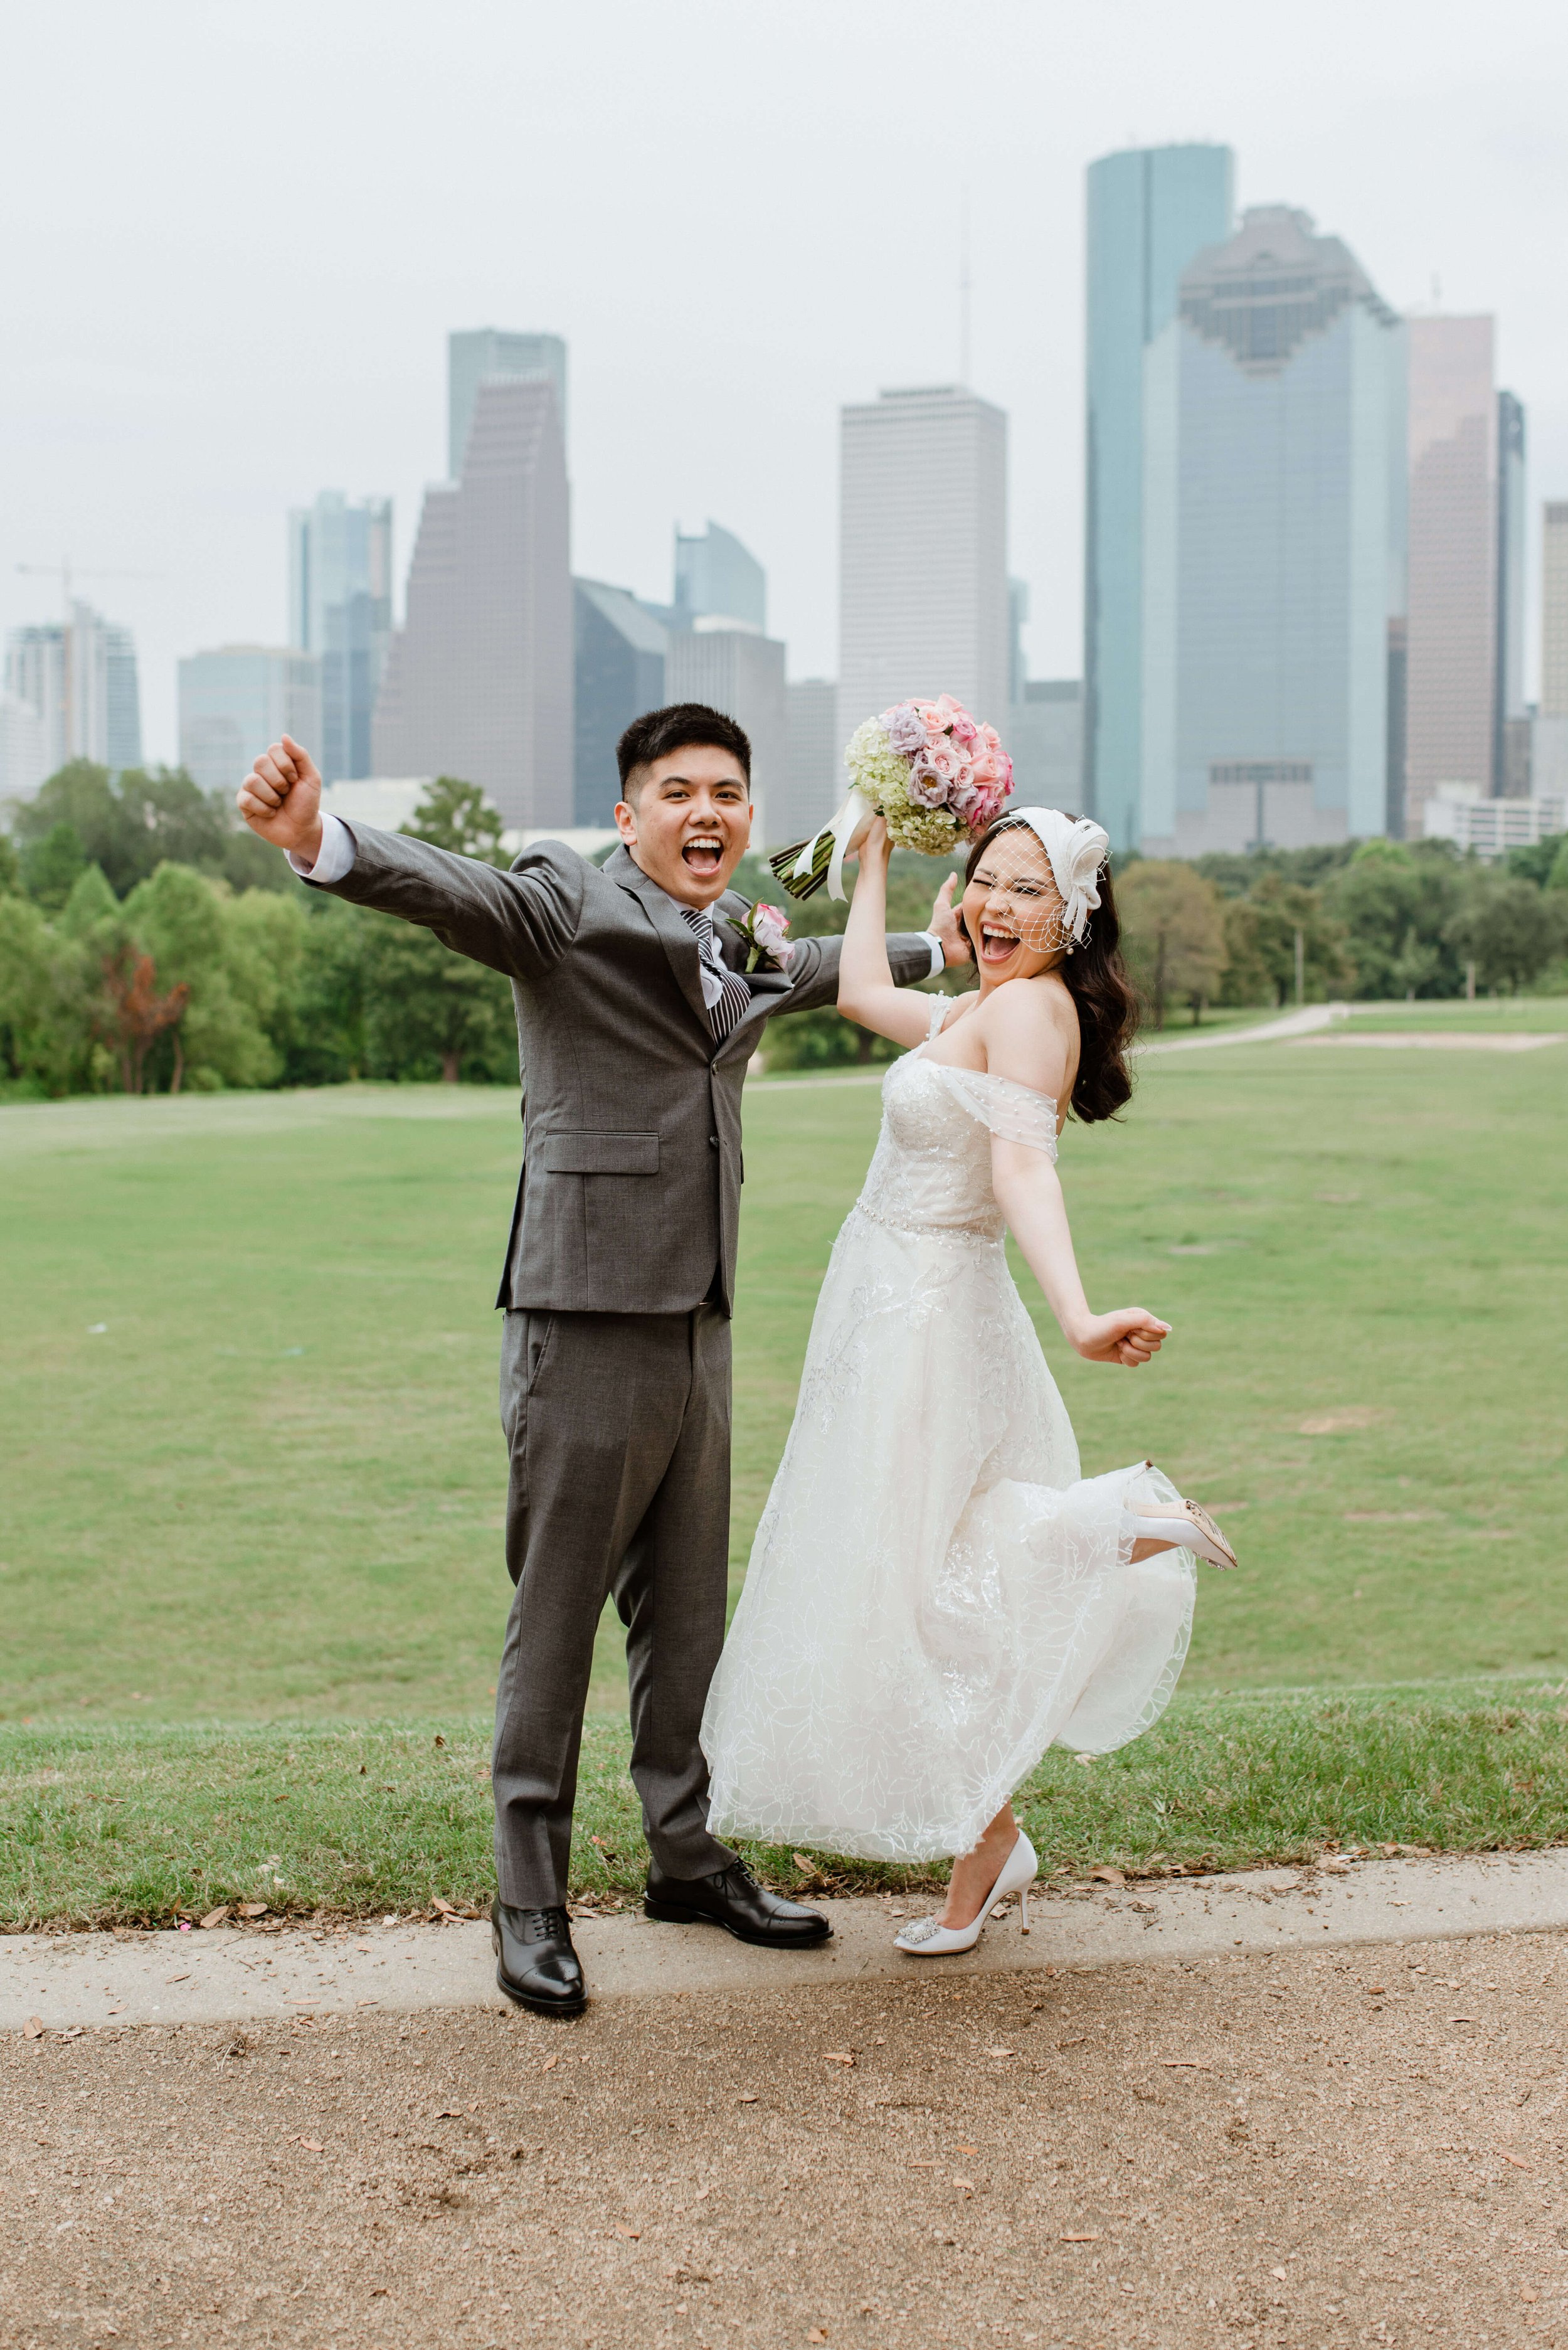 Just married Elopement photos with the Houston skyline photographed by J. Andrade Visual Arts